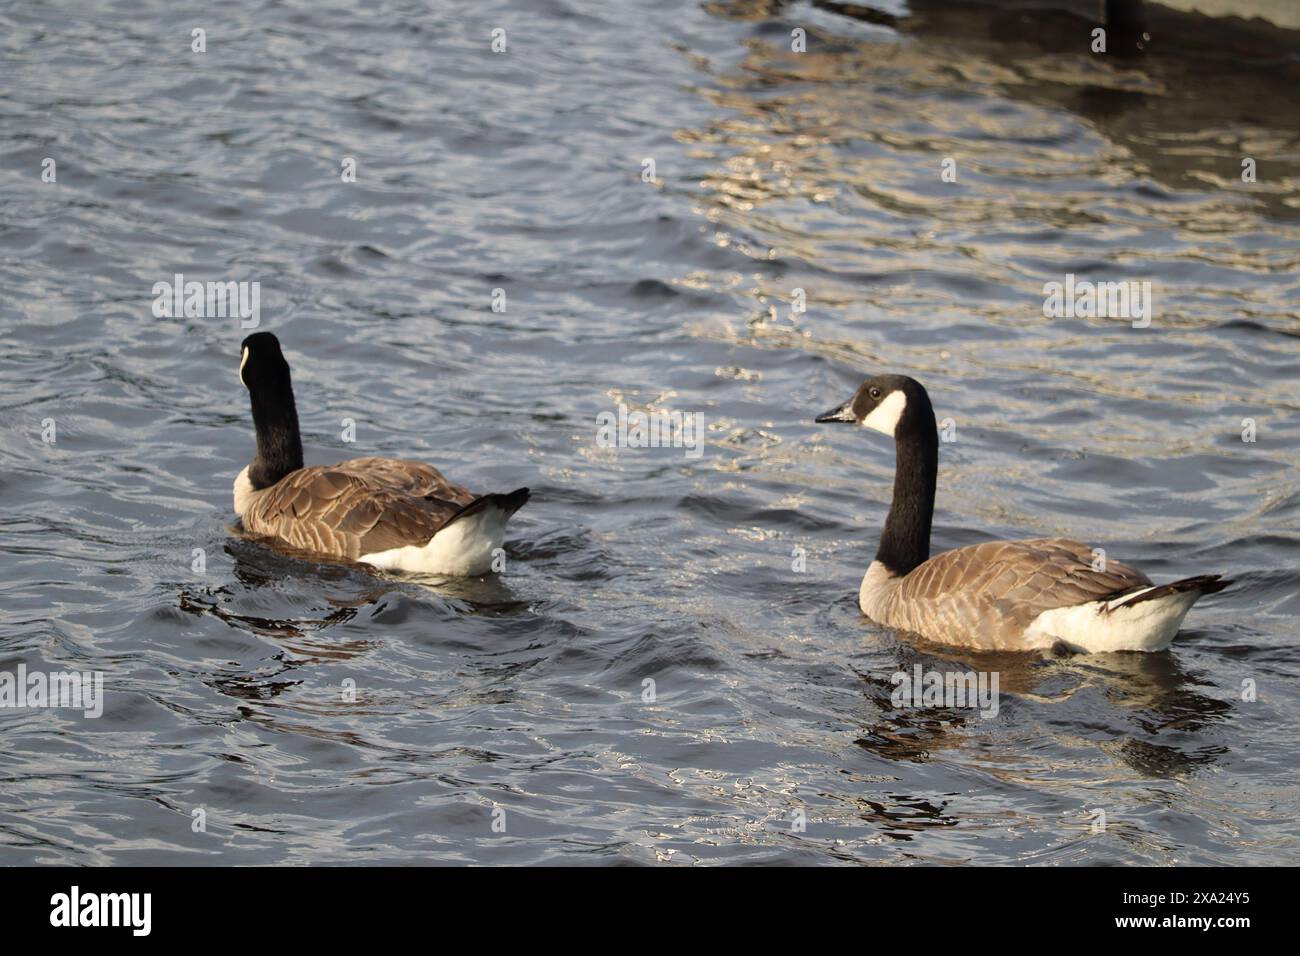 The Canada geese (Branta canadensis) gracefully gliding in a pond in a serene setting Stock Photo